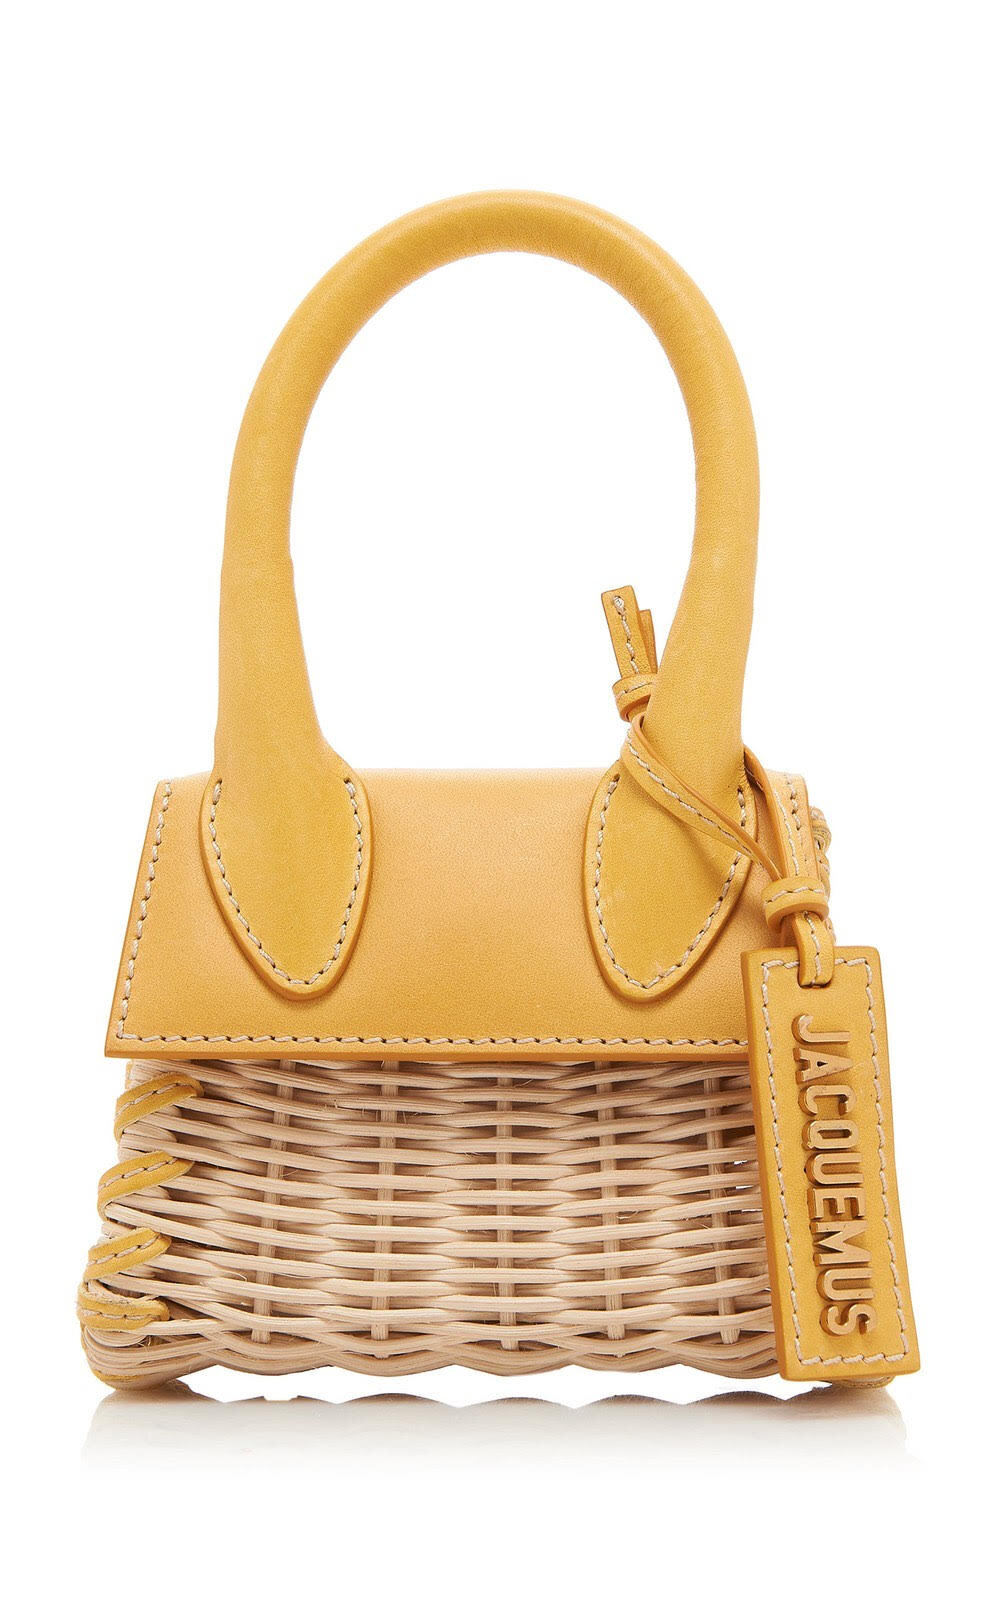 New Jacquemus Le Chiquito Wicker Bag — Collecting Luxury